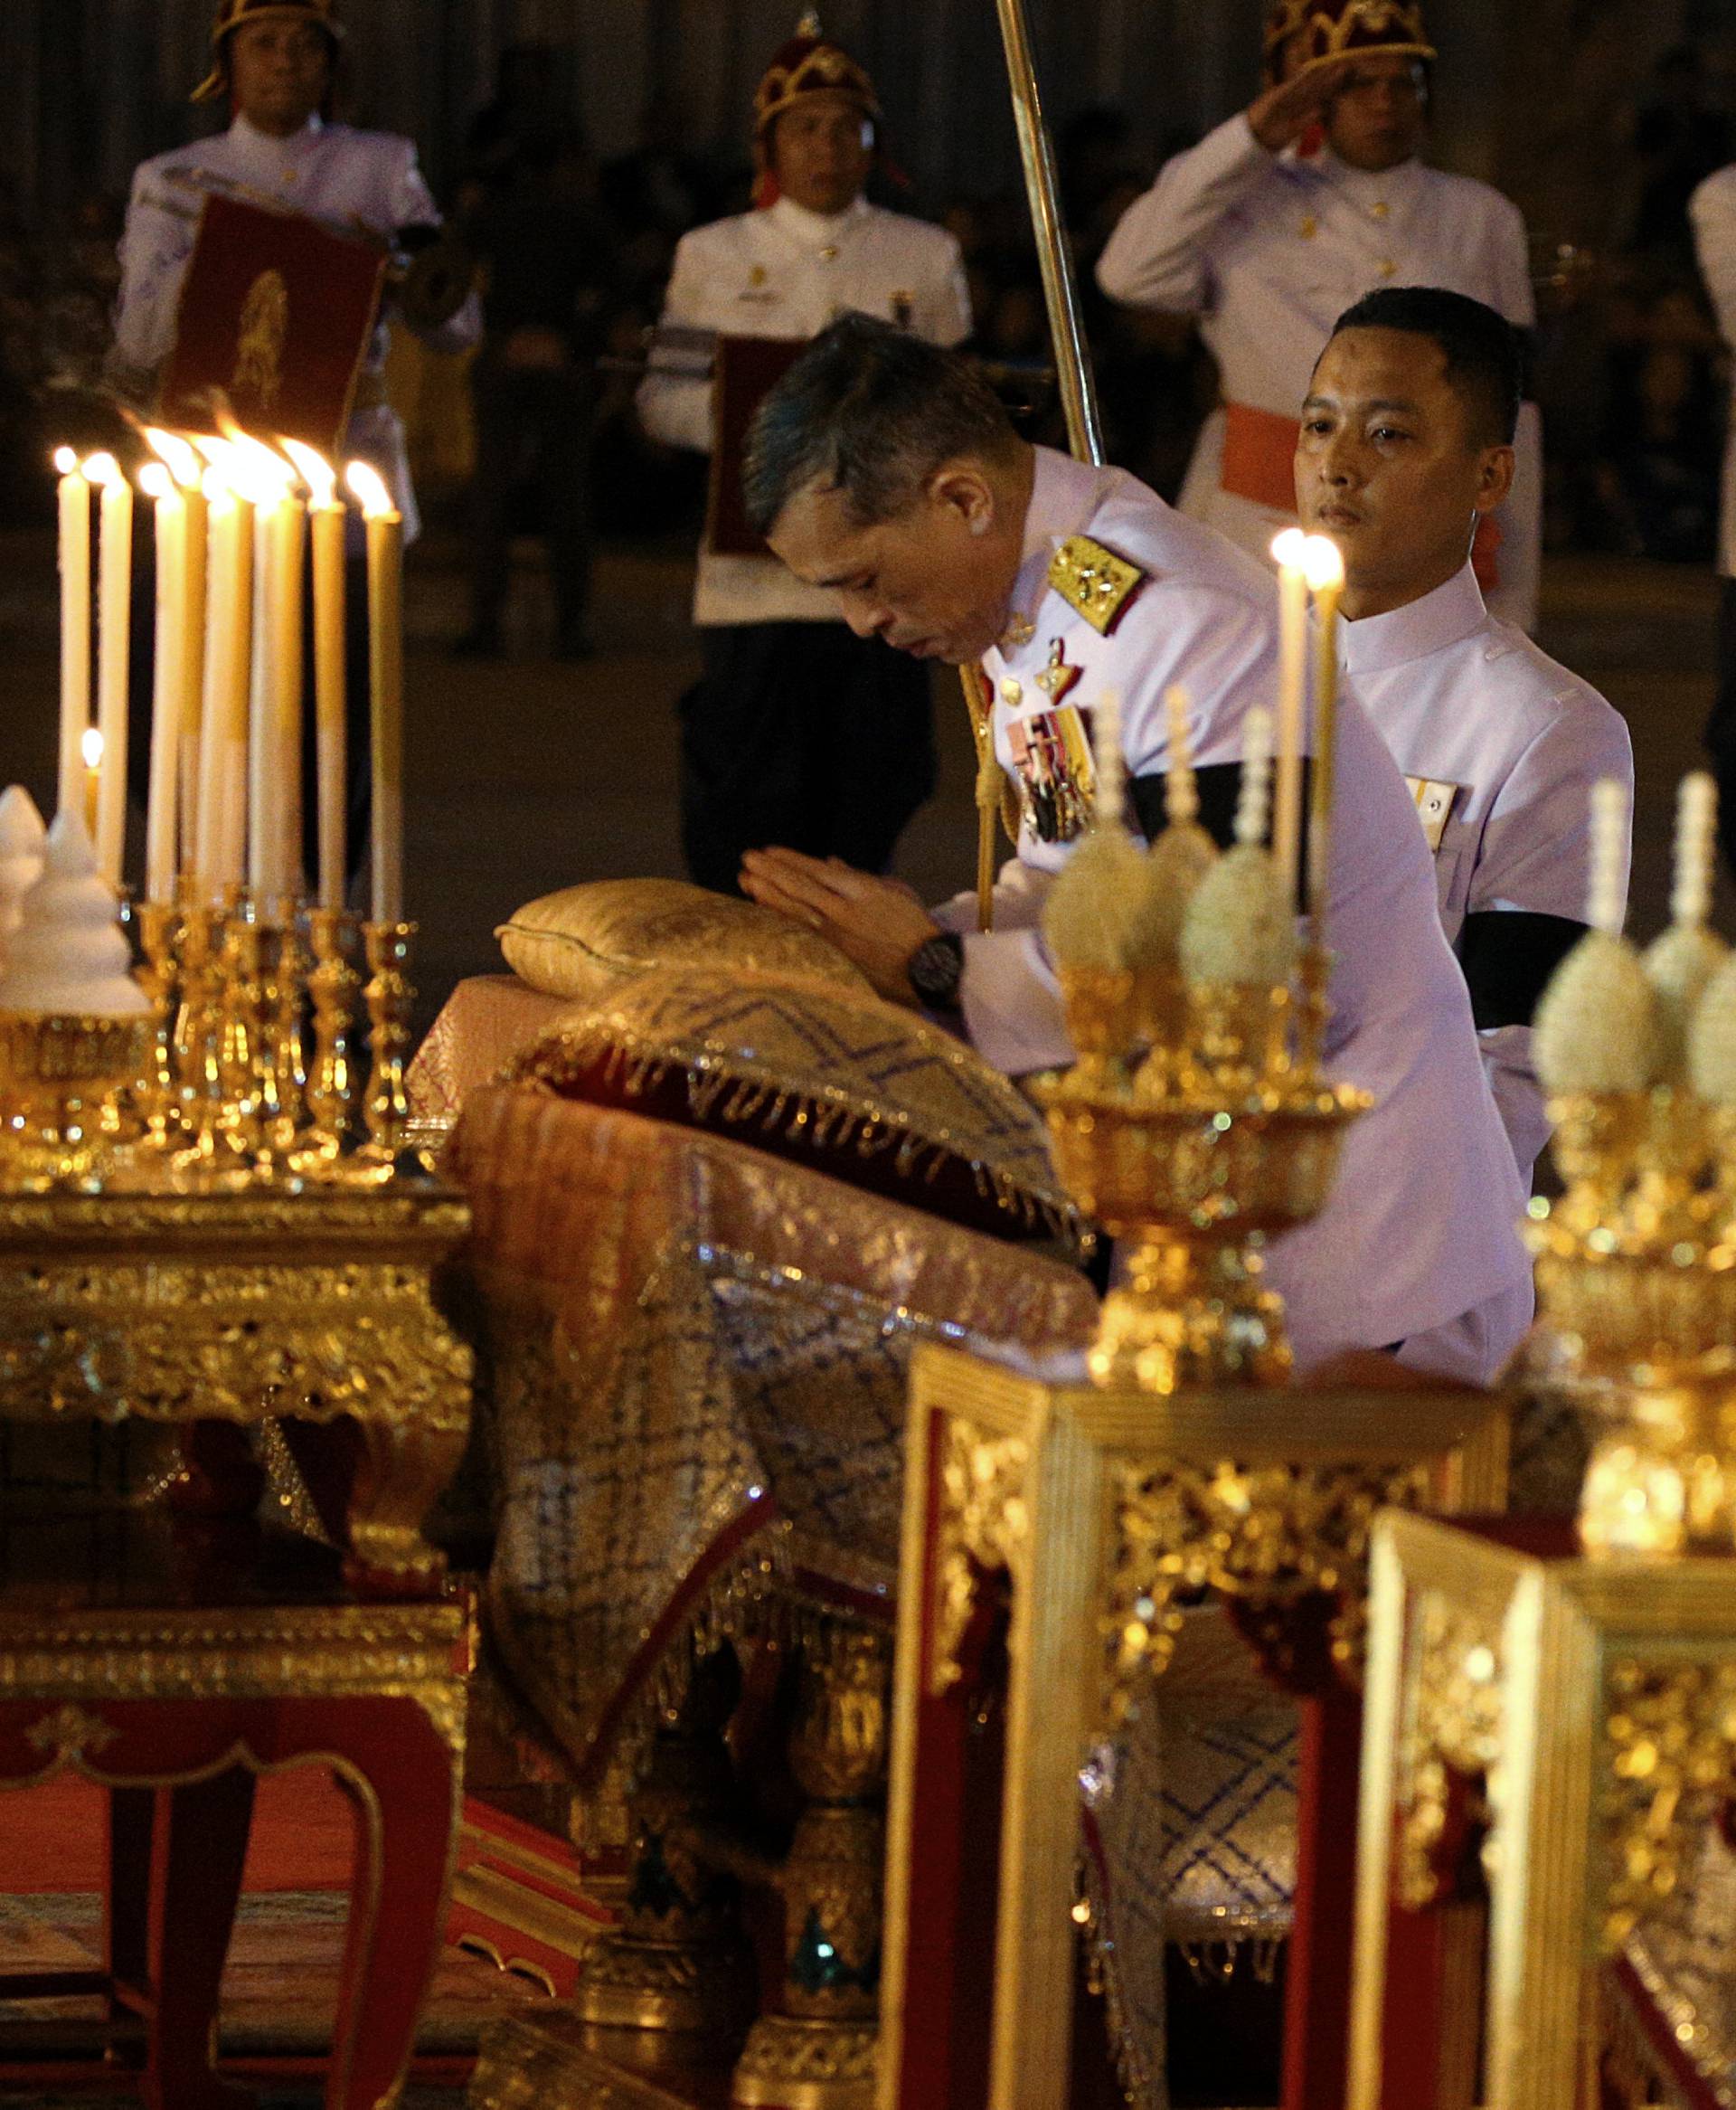 Thailand's Crown Prince Maha Vajiralongkorn attends an event commemorating the death of King Chulalongkorn, known as King Rama V, as he joins people during the mourning of his father, the late King Bhumibol Adulyadej, at the Royal Plaza in Bangkok